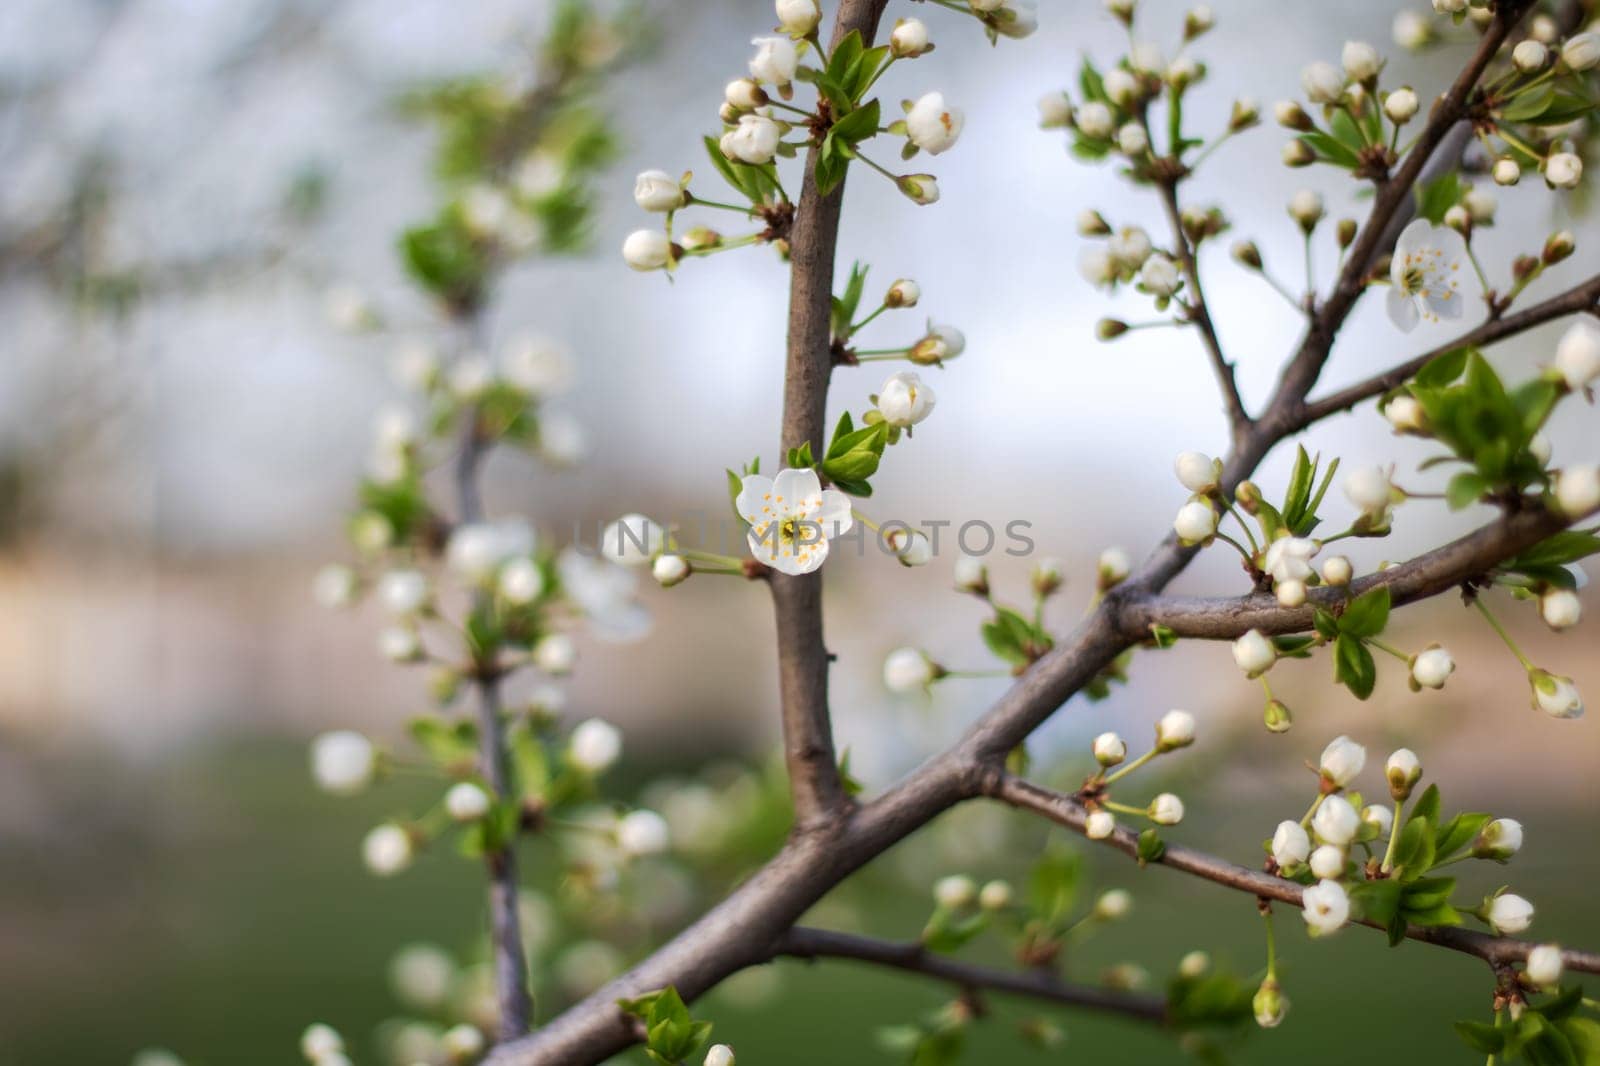 Closeup of white flower on tree branch, possibly cherry blossom by Vera1703